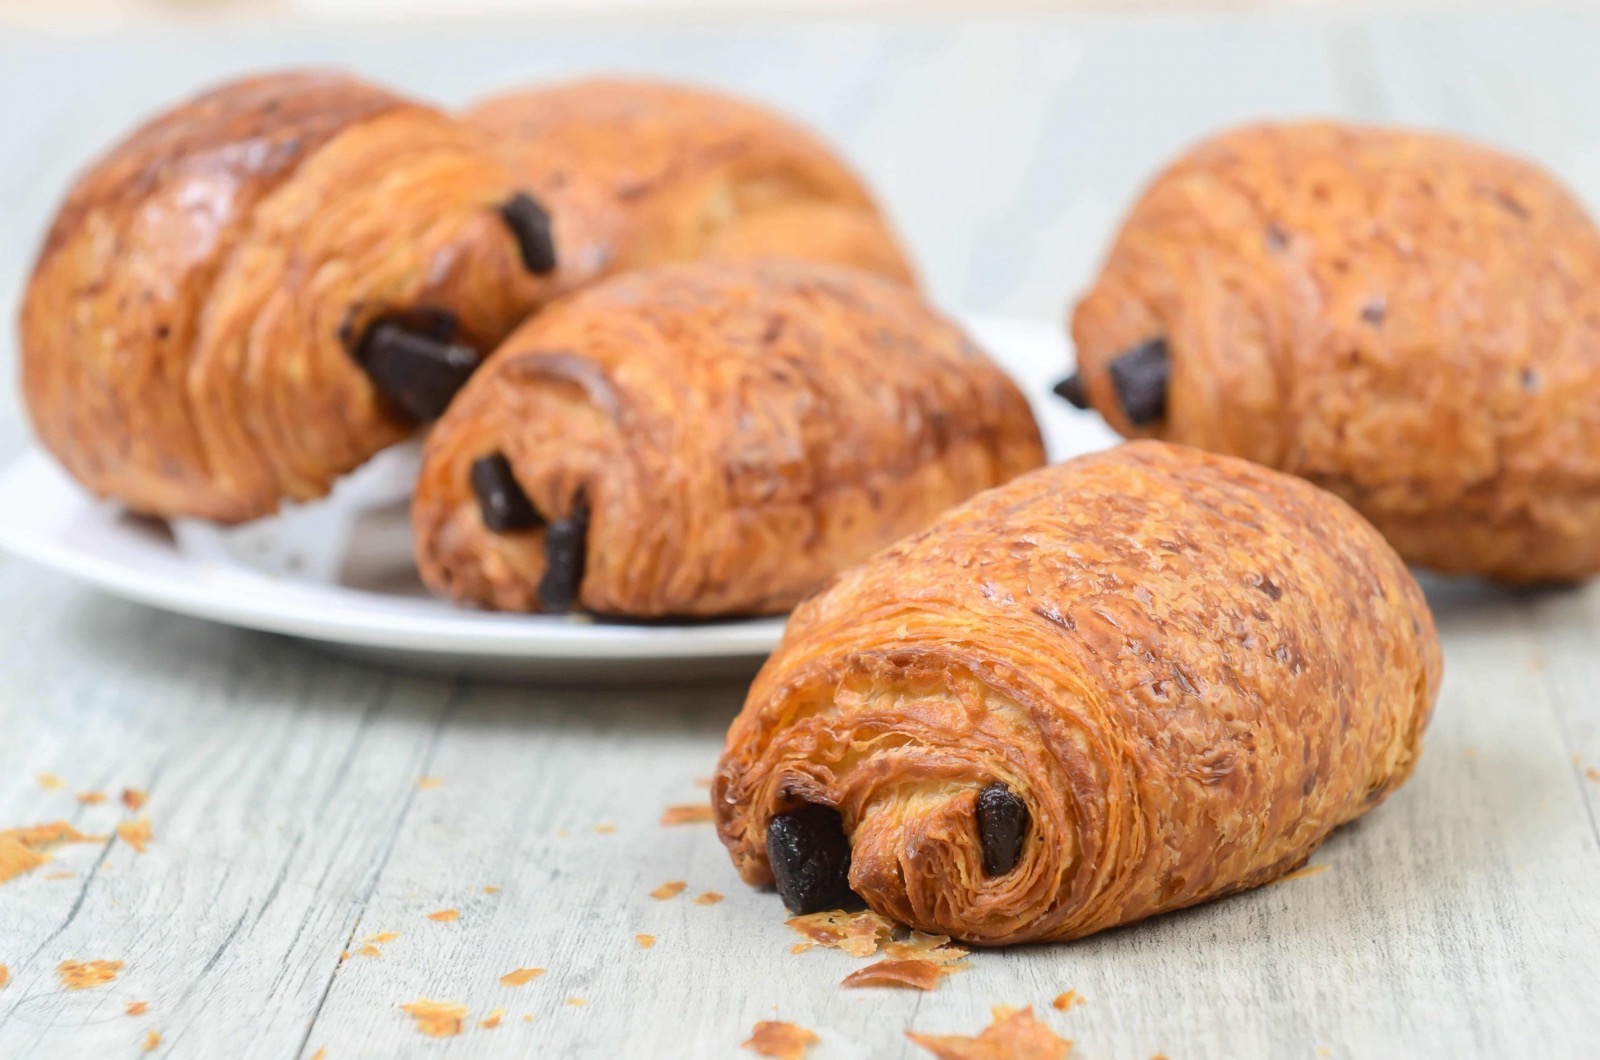 This Picture Quiz Will Challenge Your Knowledge of Classic French Desserts 🥐 – Can You Score High? Pain au chocolat